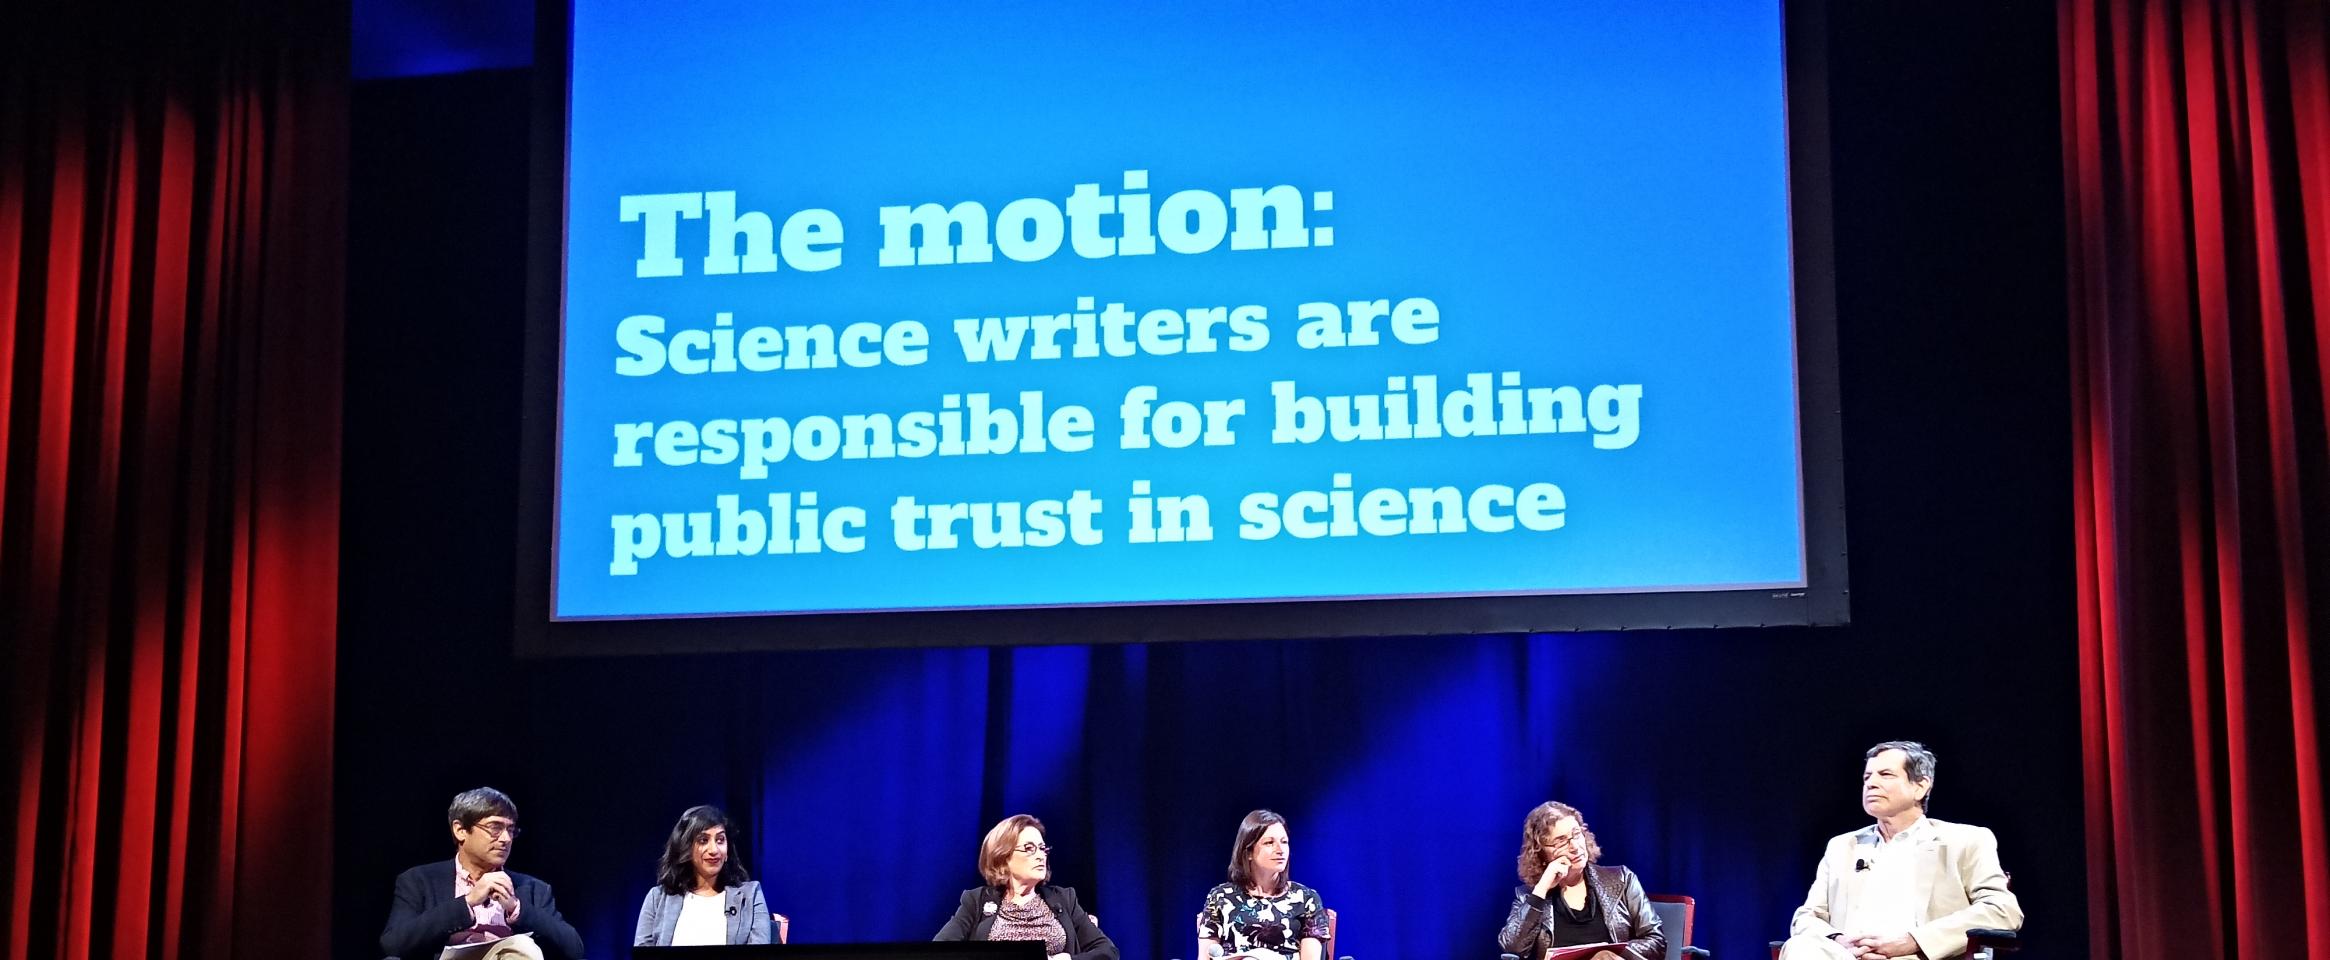 ScienceWriters 2018 panel: In the Trump era, whose job is it to build public trust in science?